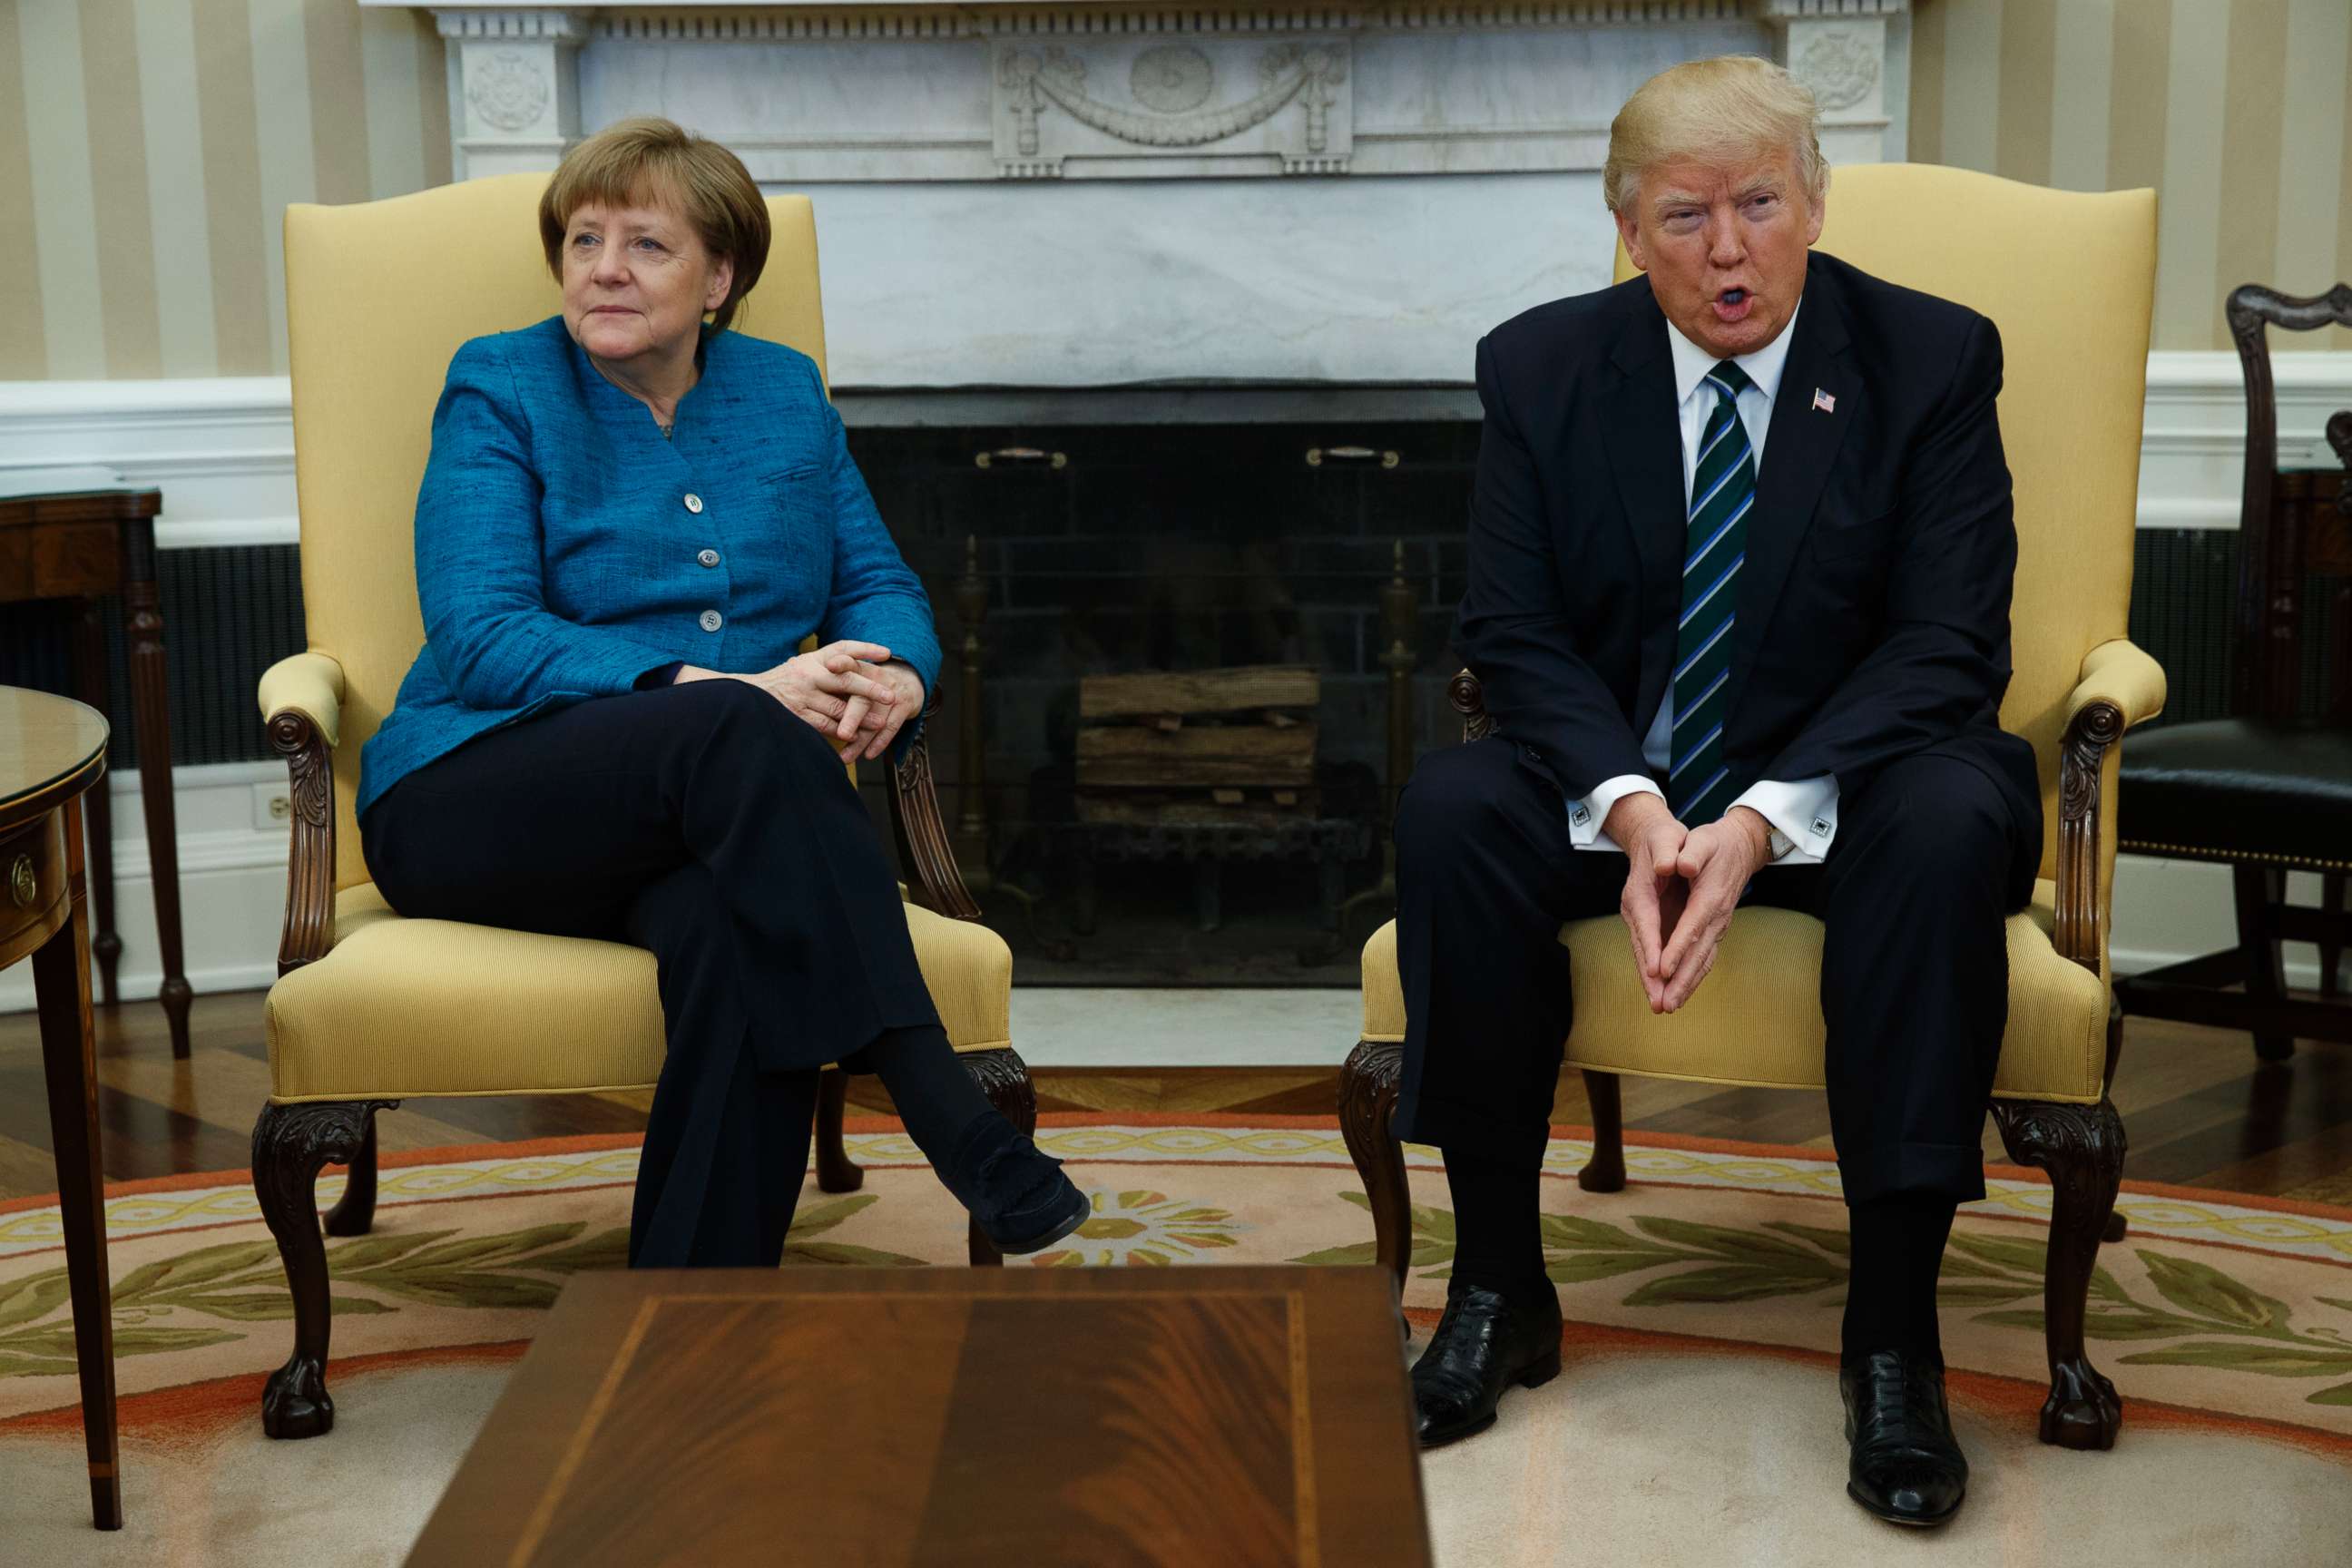 PHOTO: President Donald Trump meets with German Chancellor Angela Merkel in the Oval Office of the White House in Washington, March 17, 2017.